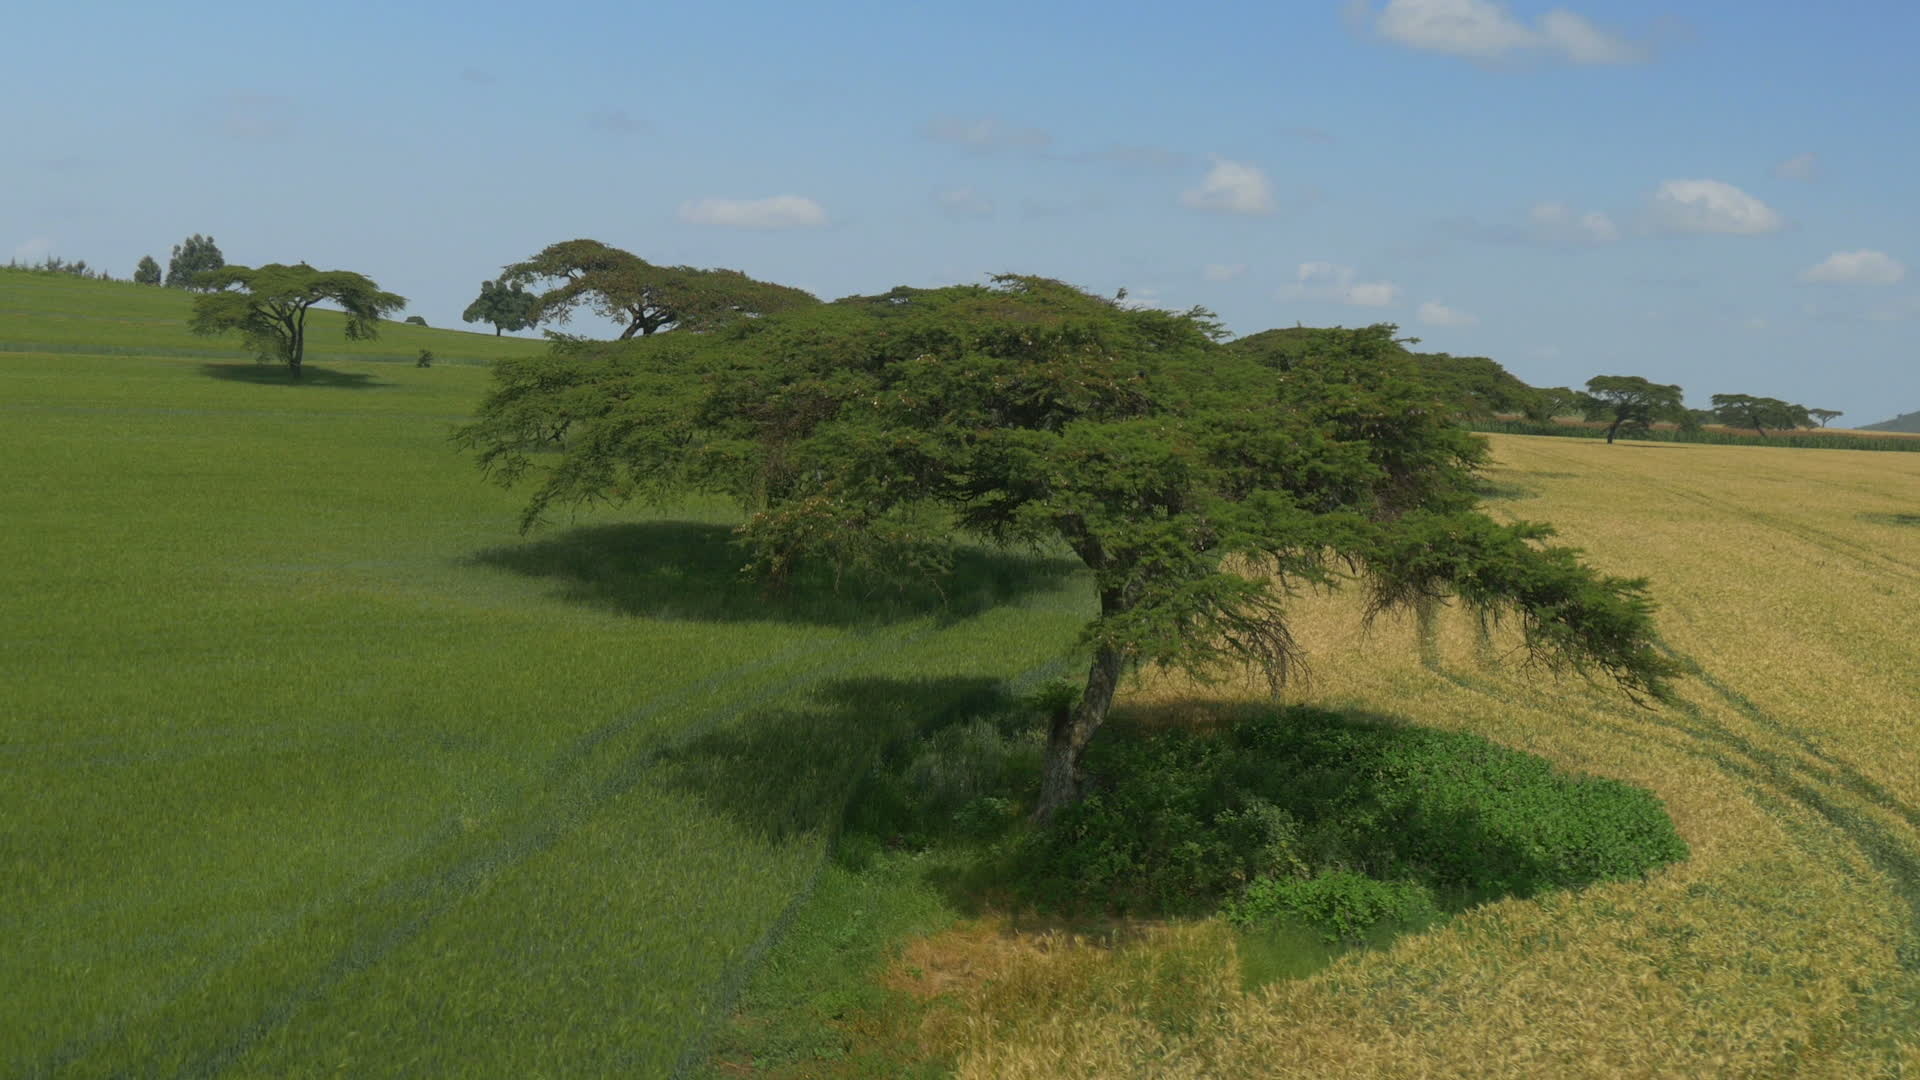 Aerial acacia trees, Wheat field view, African scenery, Stock video footage, 1920x1080 Full HD Desktop